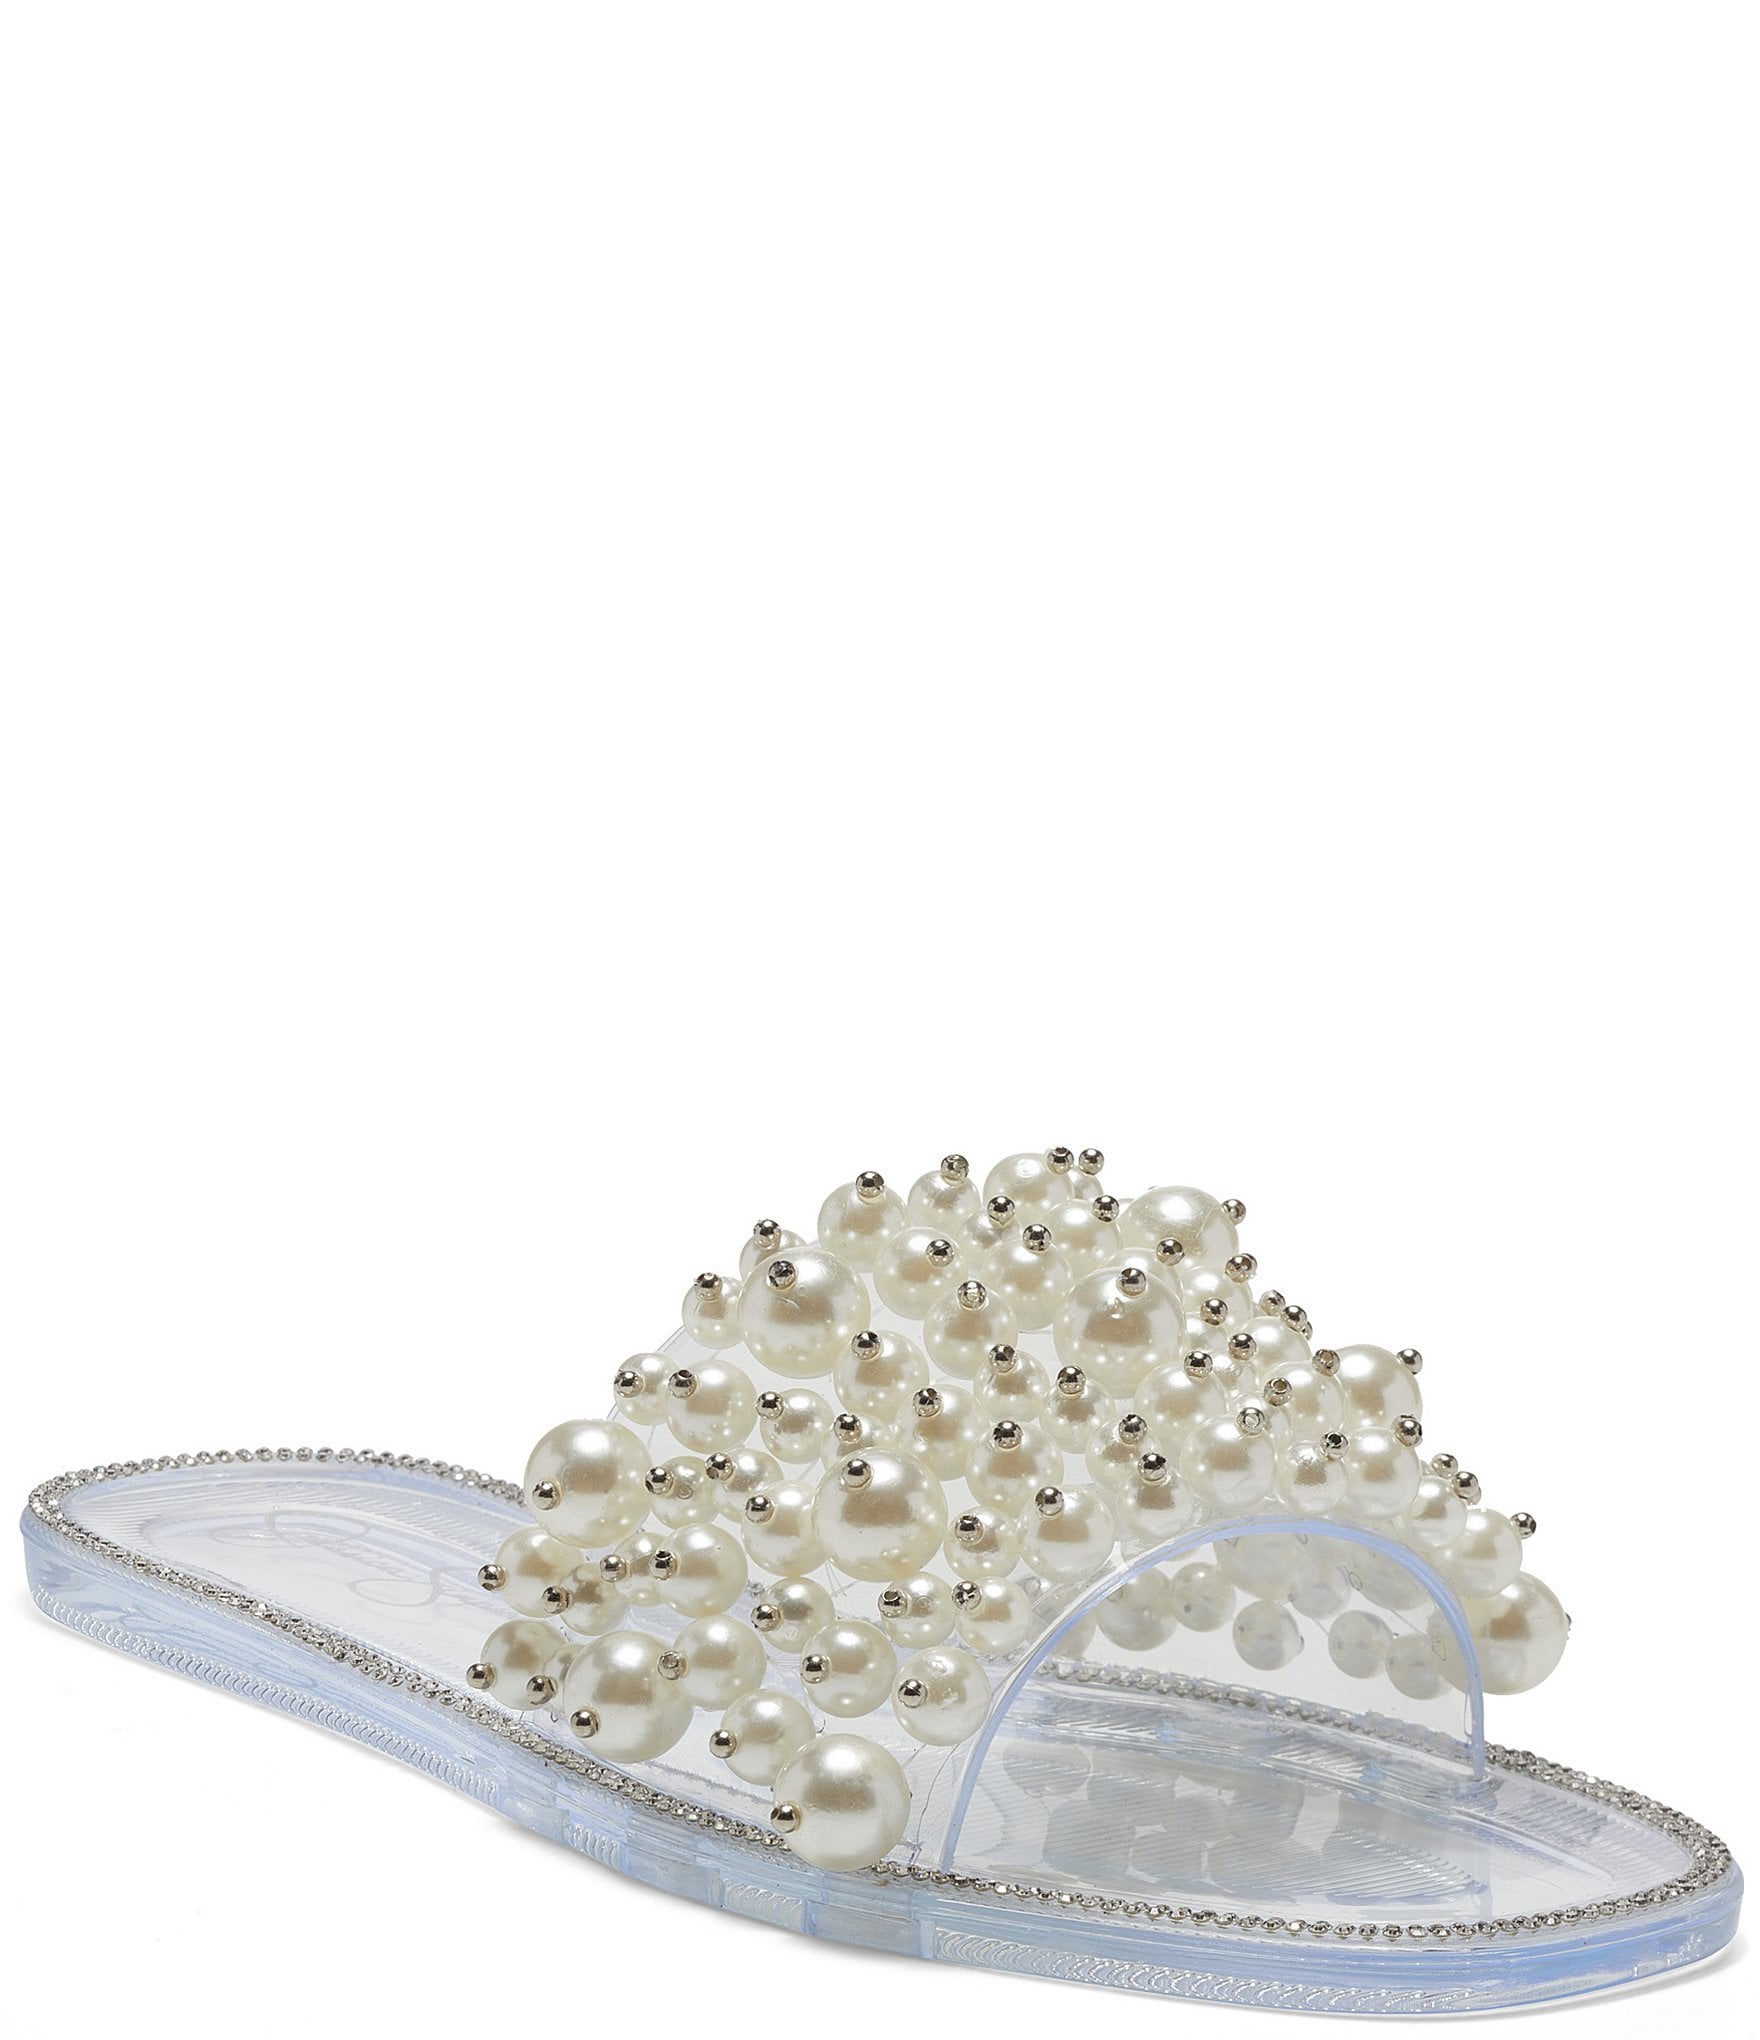 Clear Chanel Slides Discount Collection, Save 52% | jlcatj.gob.mx